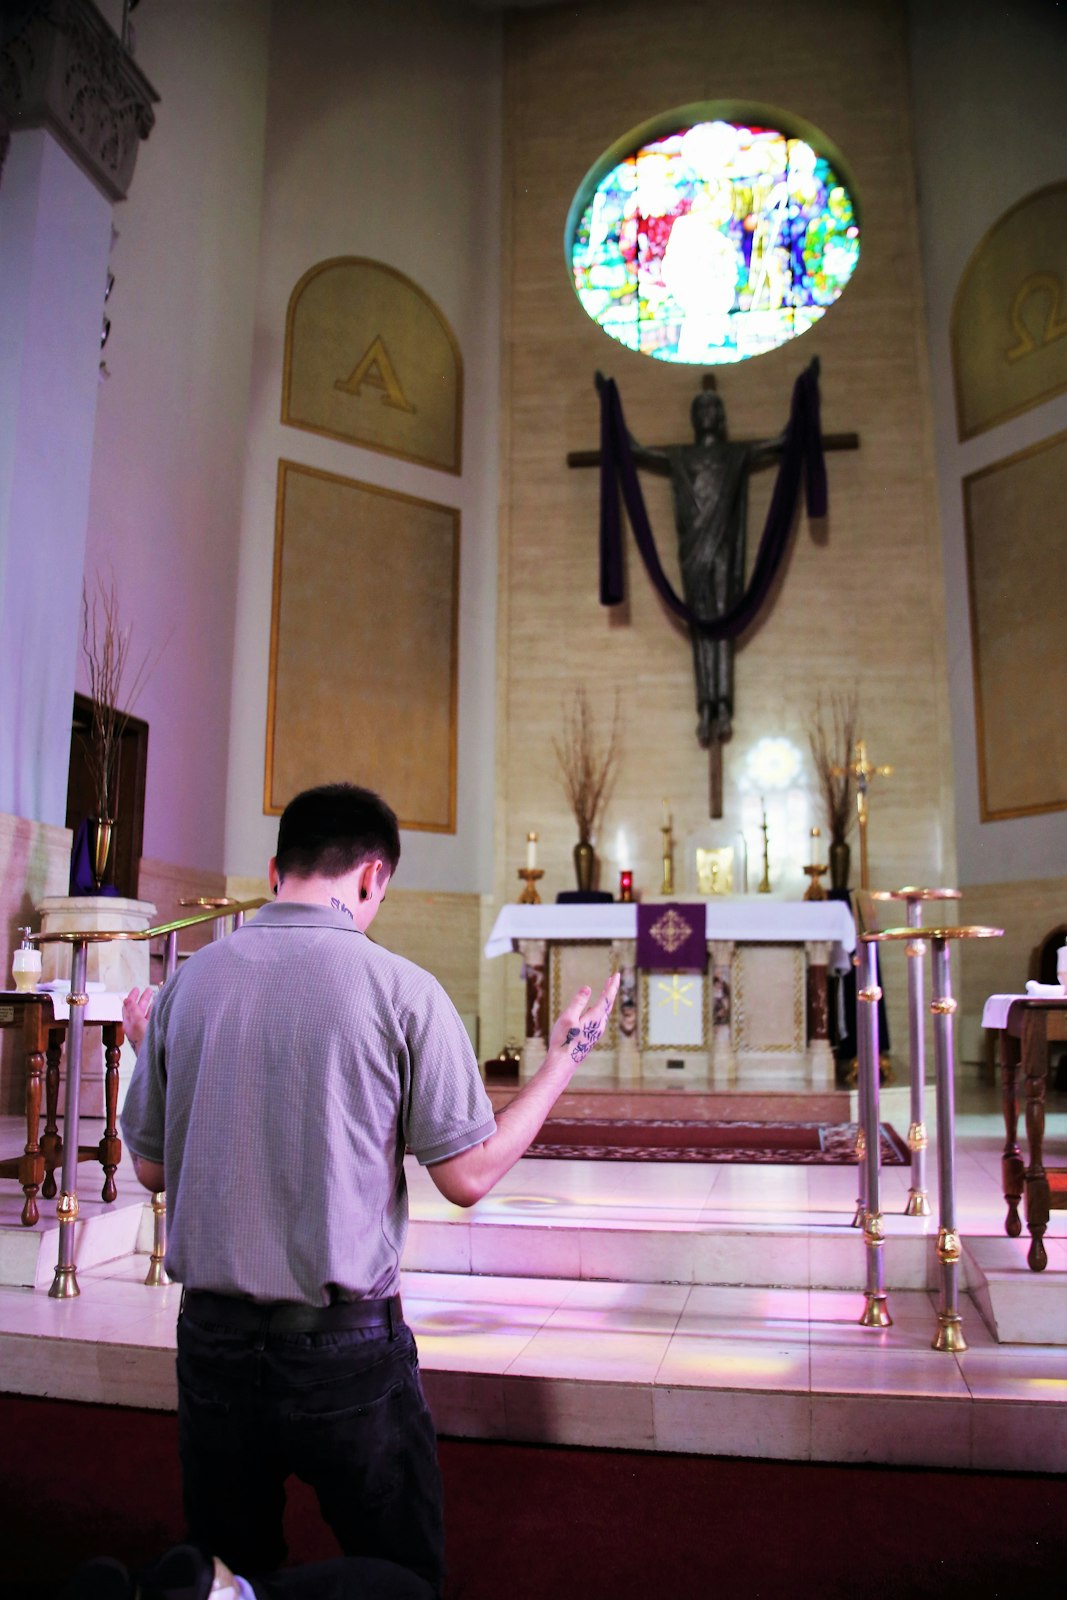 Trent Vecchiarino prays before the altar at St. Mary of the Immaculate Conception Parish in Monroe, where he'll be baptized next Sunday at the Easter vigil. Discovering the power of forgiveness has radically changed Trent's life. “I just drop to my knees and ask for God to come to me," Trent says. "And He comes immediately, saves me from my destructive mindset.”